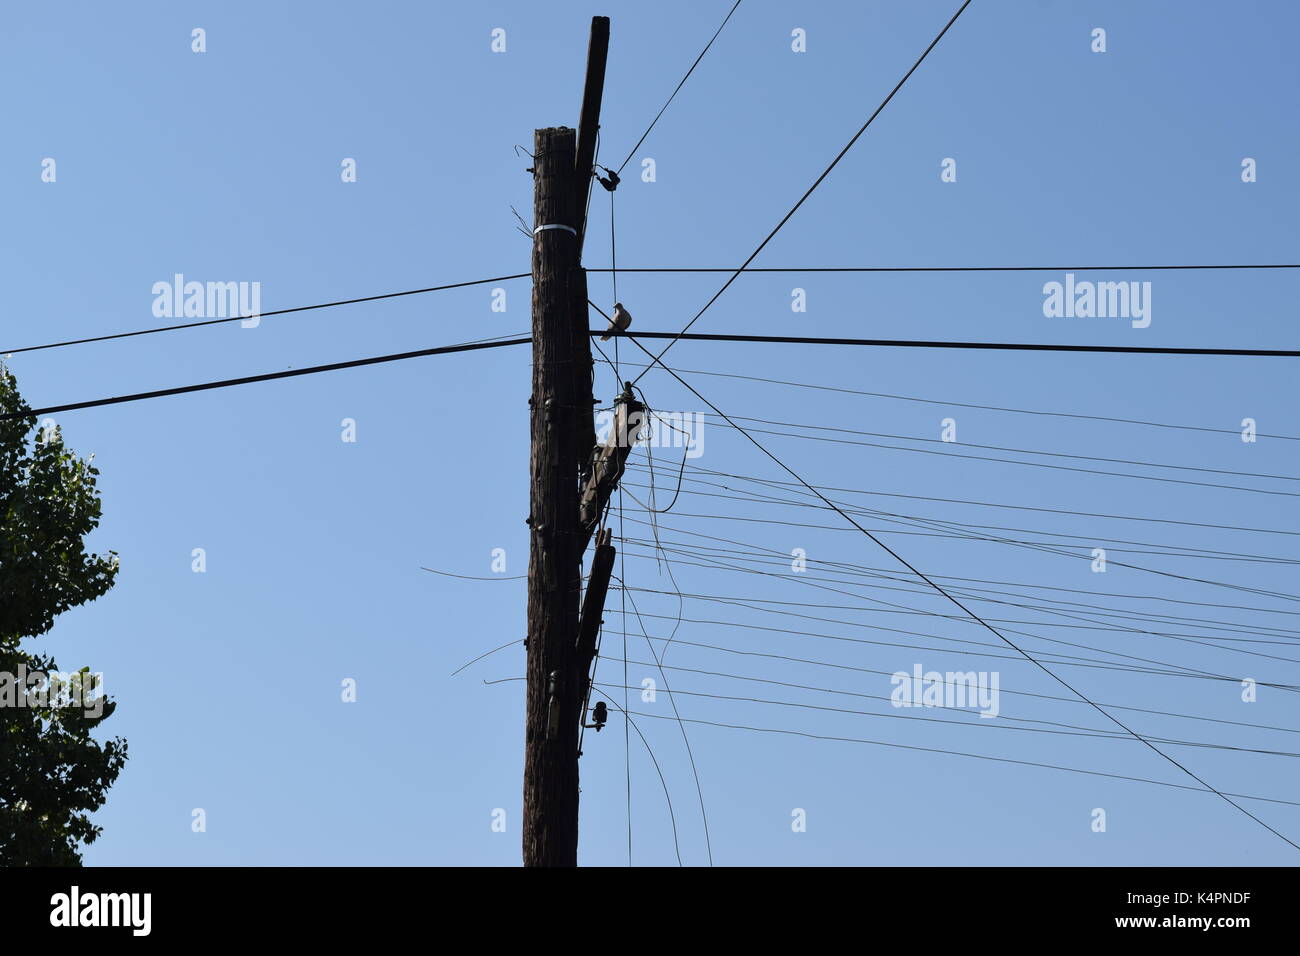 Tall electric line on a pole Stock Photo